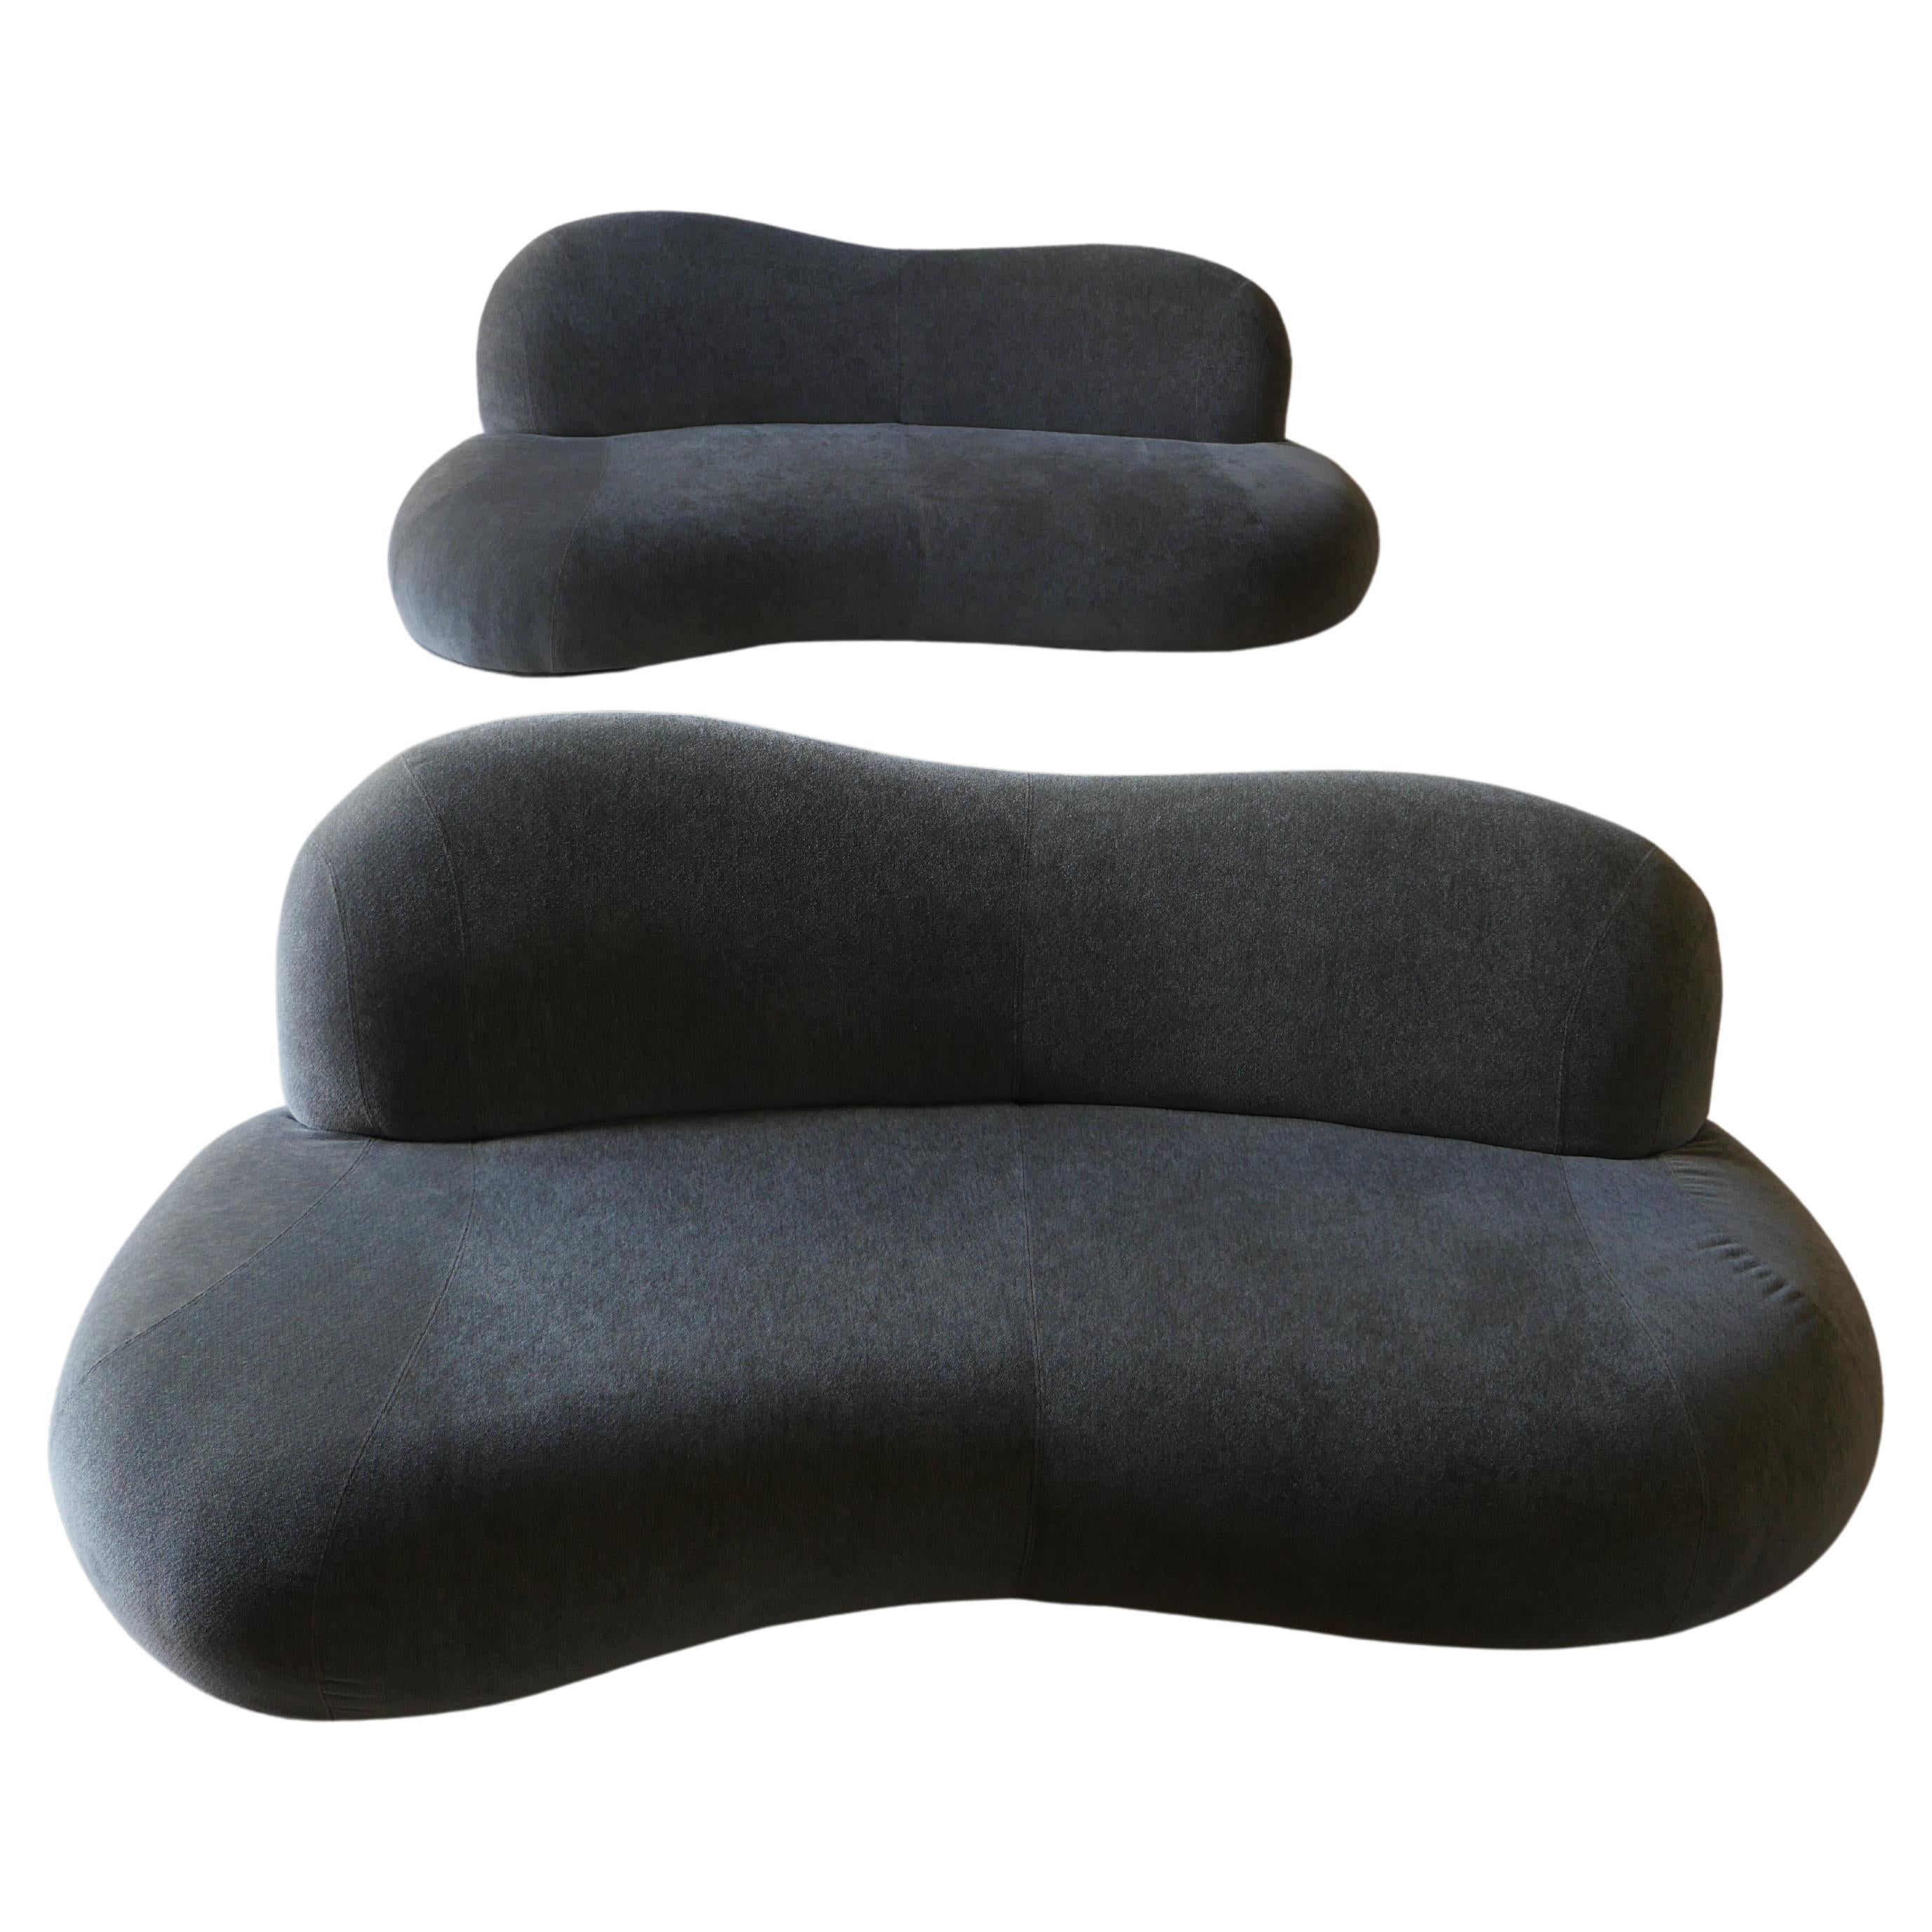 1990s, Organic Form Sofa by Preview